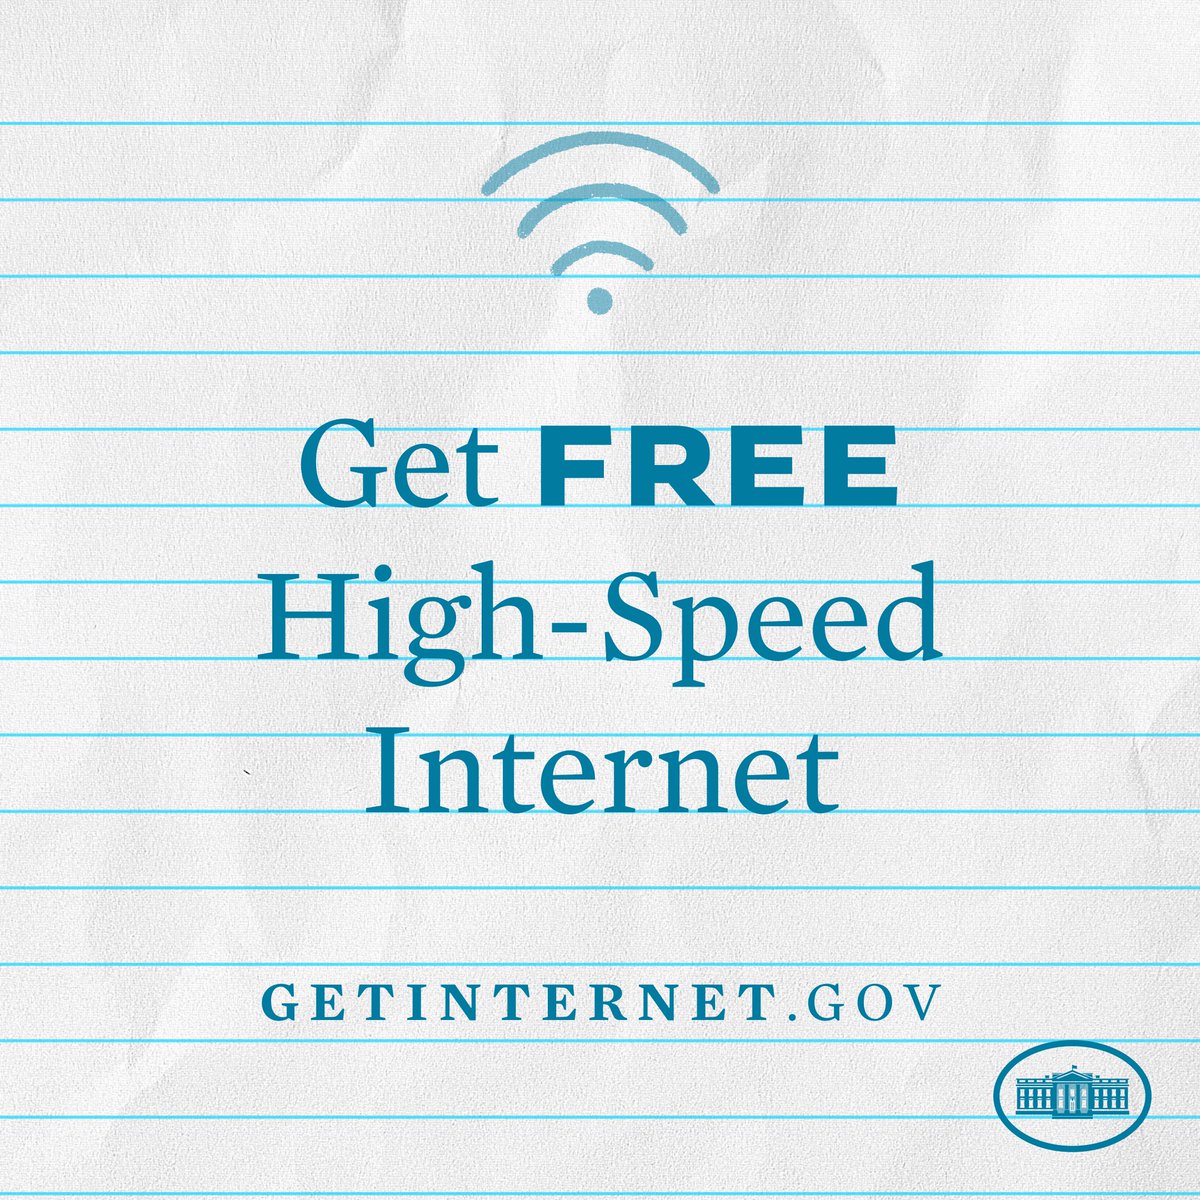 #DYK: You may be eligible for free high-speed internet from one of 20 participating providers through the @FCC's Affordable Connectivity Program (ACP)! Find out how to apply at GetInternet.gov.